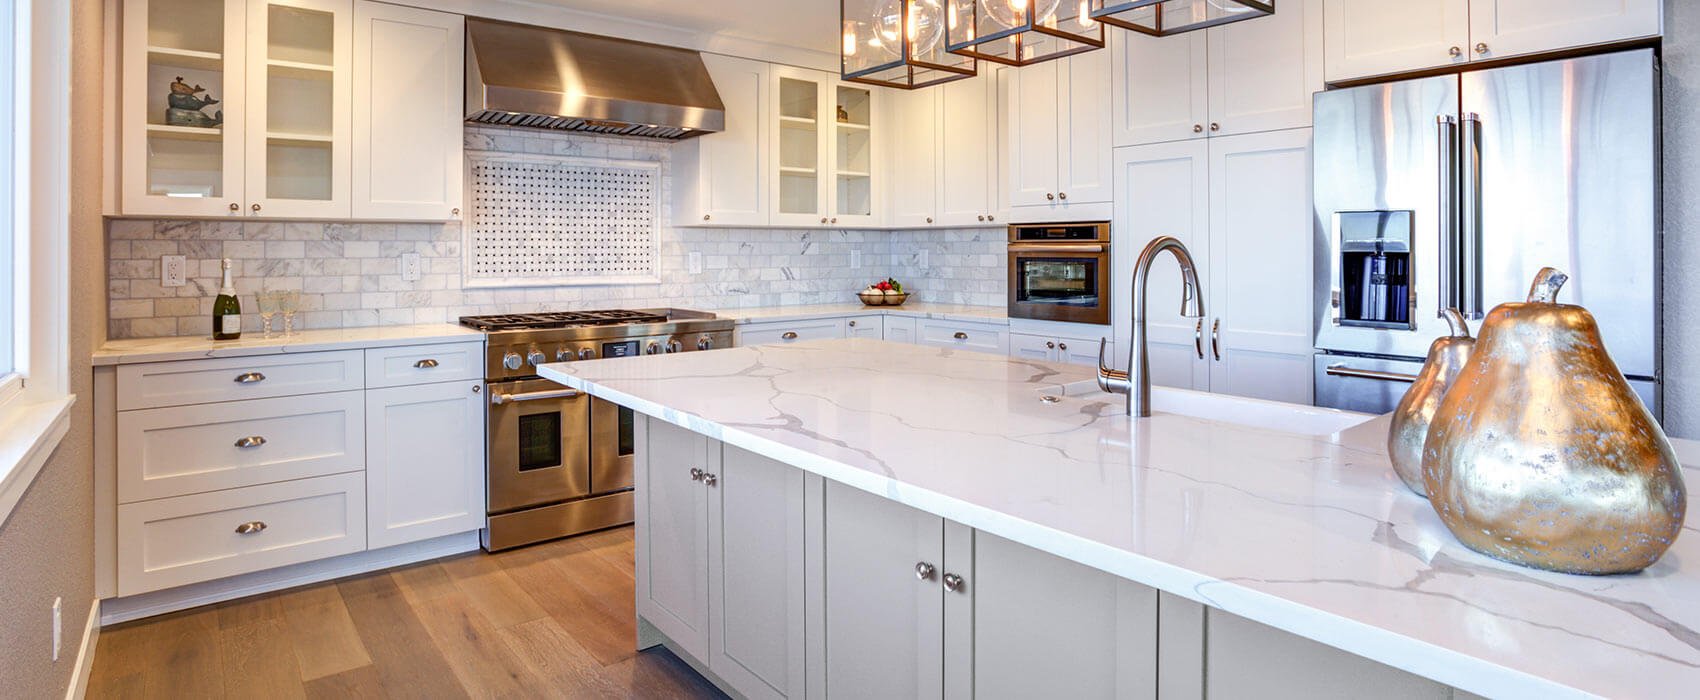 bright modern kitchen with white shaker cabinets, stainless steel appliances and gray marble subway tile backsplash